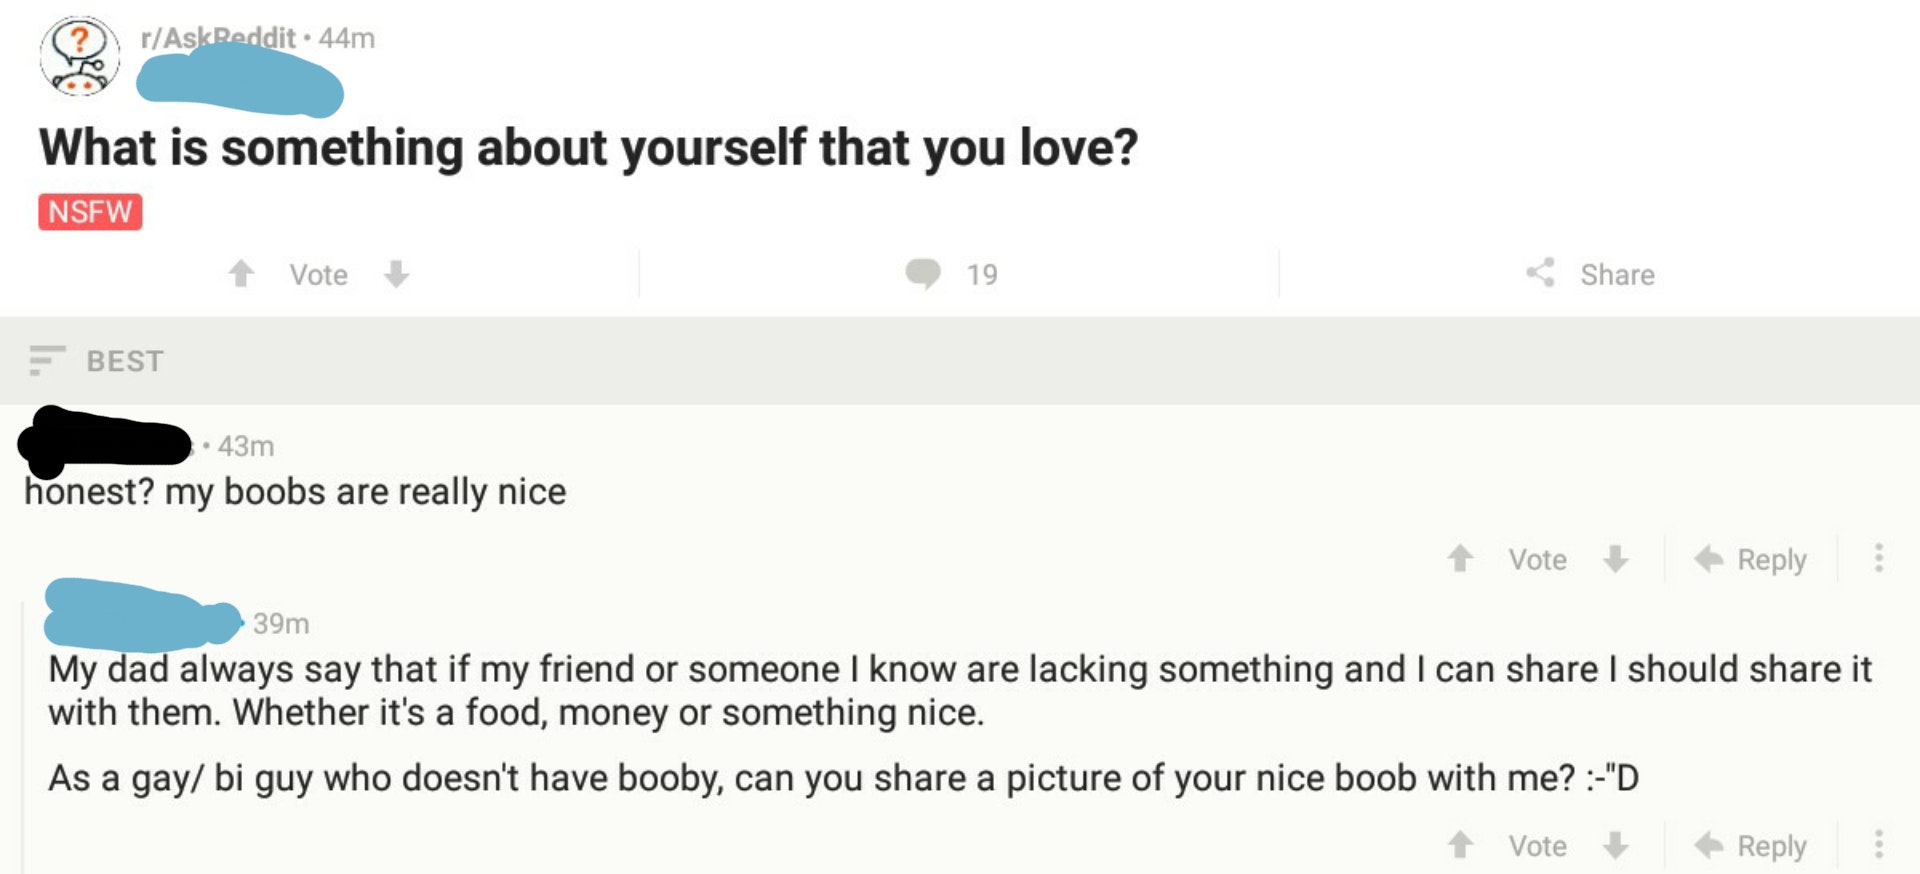 diagram - rAskReddit. 44m What is something about yourself that you love? Nsfw Vote 19 Best 43m honest? my boobs are really nice Vote 39m My dad always say that if my friend or someone I know are lacking something and I can I should it with them. Whether 